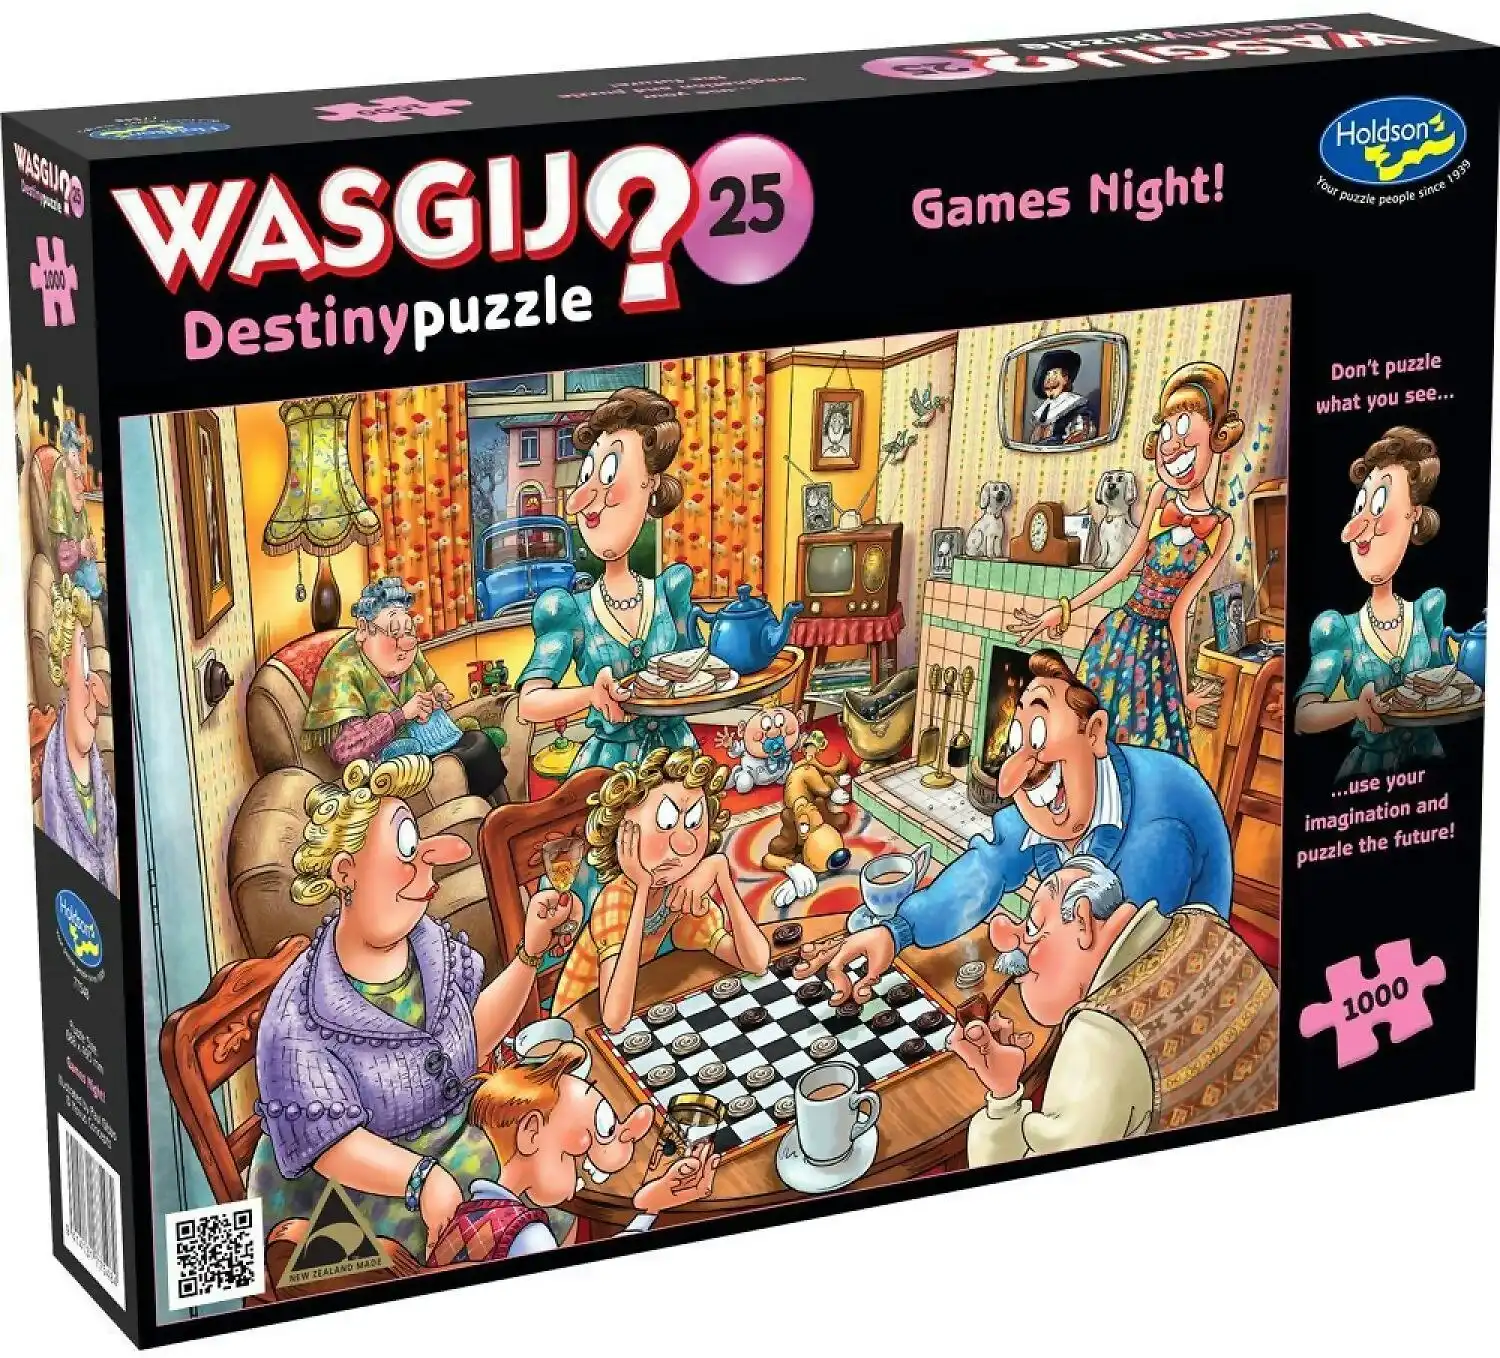 Wasgij - Destiny 25 - Games Night Holdson Jigsaw Puzzle 1000 Pieces